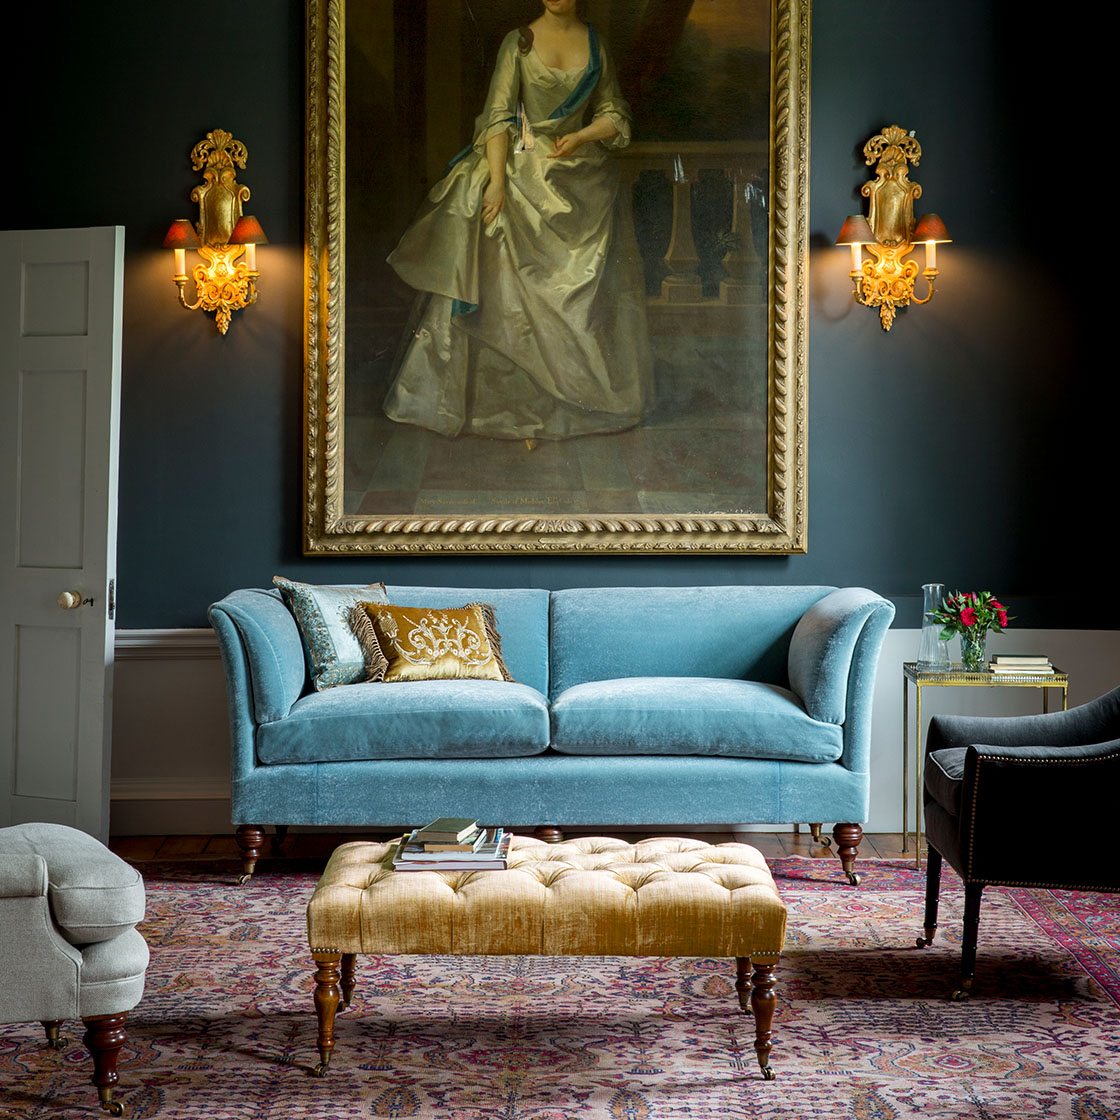 Pompadour high back sofa in Casaleone -Cambridge blue With Thalia and Sophia cushions - Beaumont & Fletcher